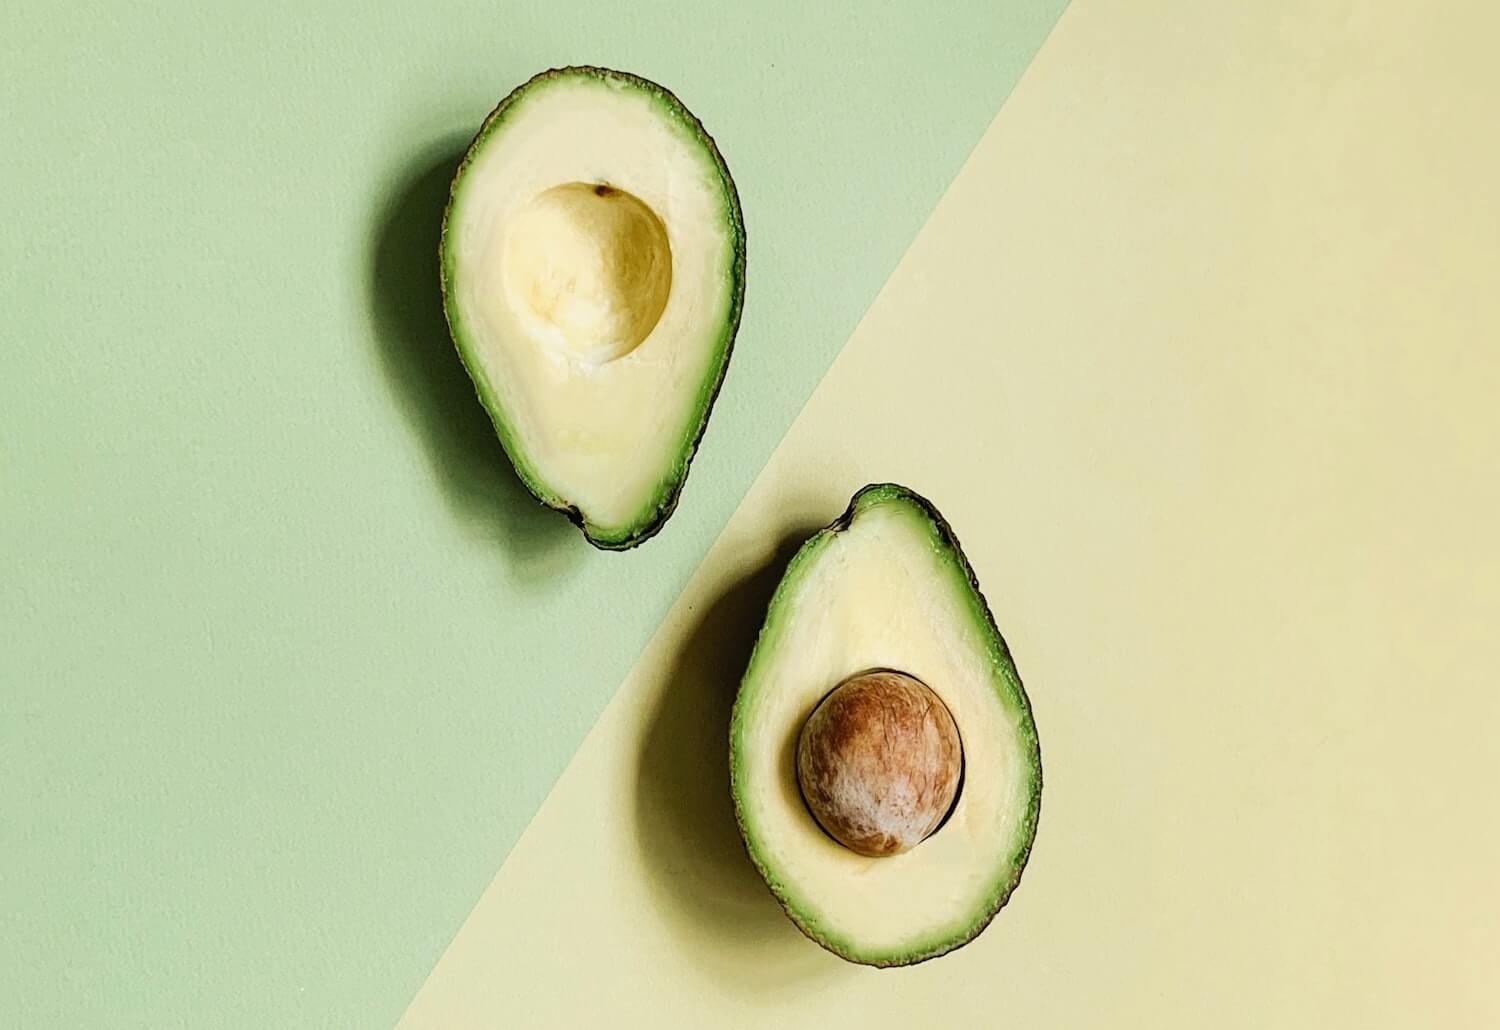 Two halves of an avocado on a yellow and green background